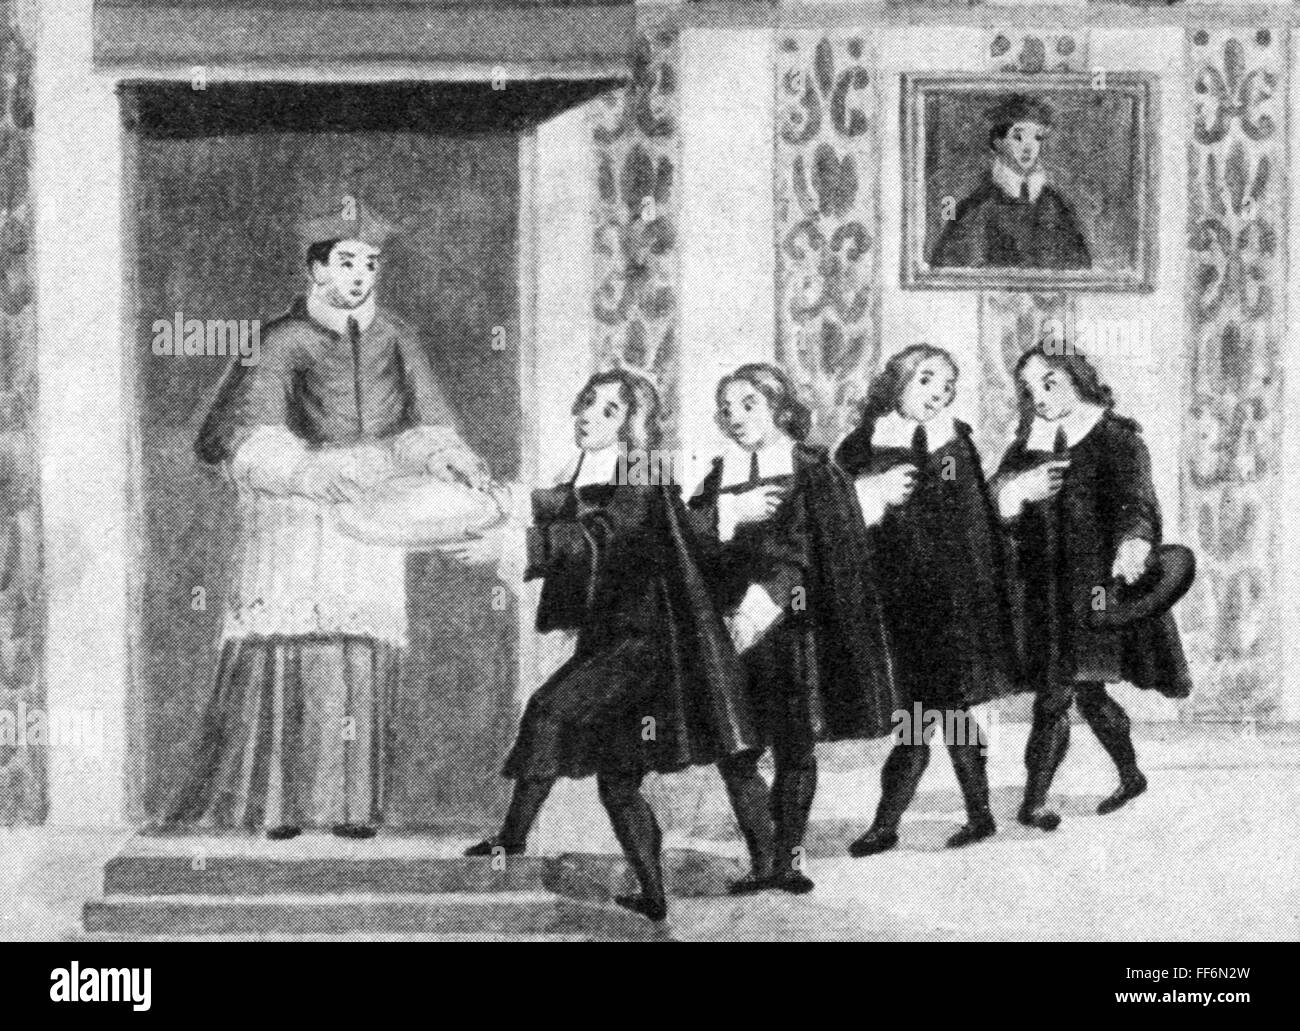 pedagogy, students, Bolognese students presenting the first snow to the cardinal legate, watercolour, 18th century, Biblioteca Comunale, Bologna, 18th century, fine arts, art, art of painting, Italy, university, universities, full length, standing, clergyman, clergy, cardinal legate, present, presenting, give, giving, snow, winter, wintertime, wintertide, wintry, winterly, season, seasonal, pedagogy, paedagogy, education, students, student, first, 1st, watercolour, watercolor, historic, historical, man, men, male, people, Additional-Rights-Clearences-Not Available Stock Photo